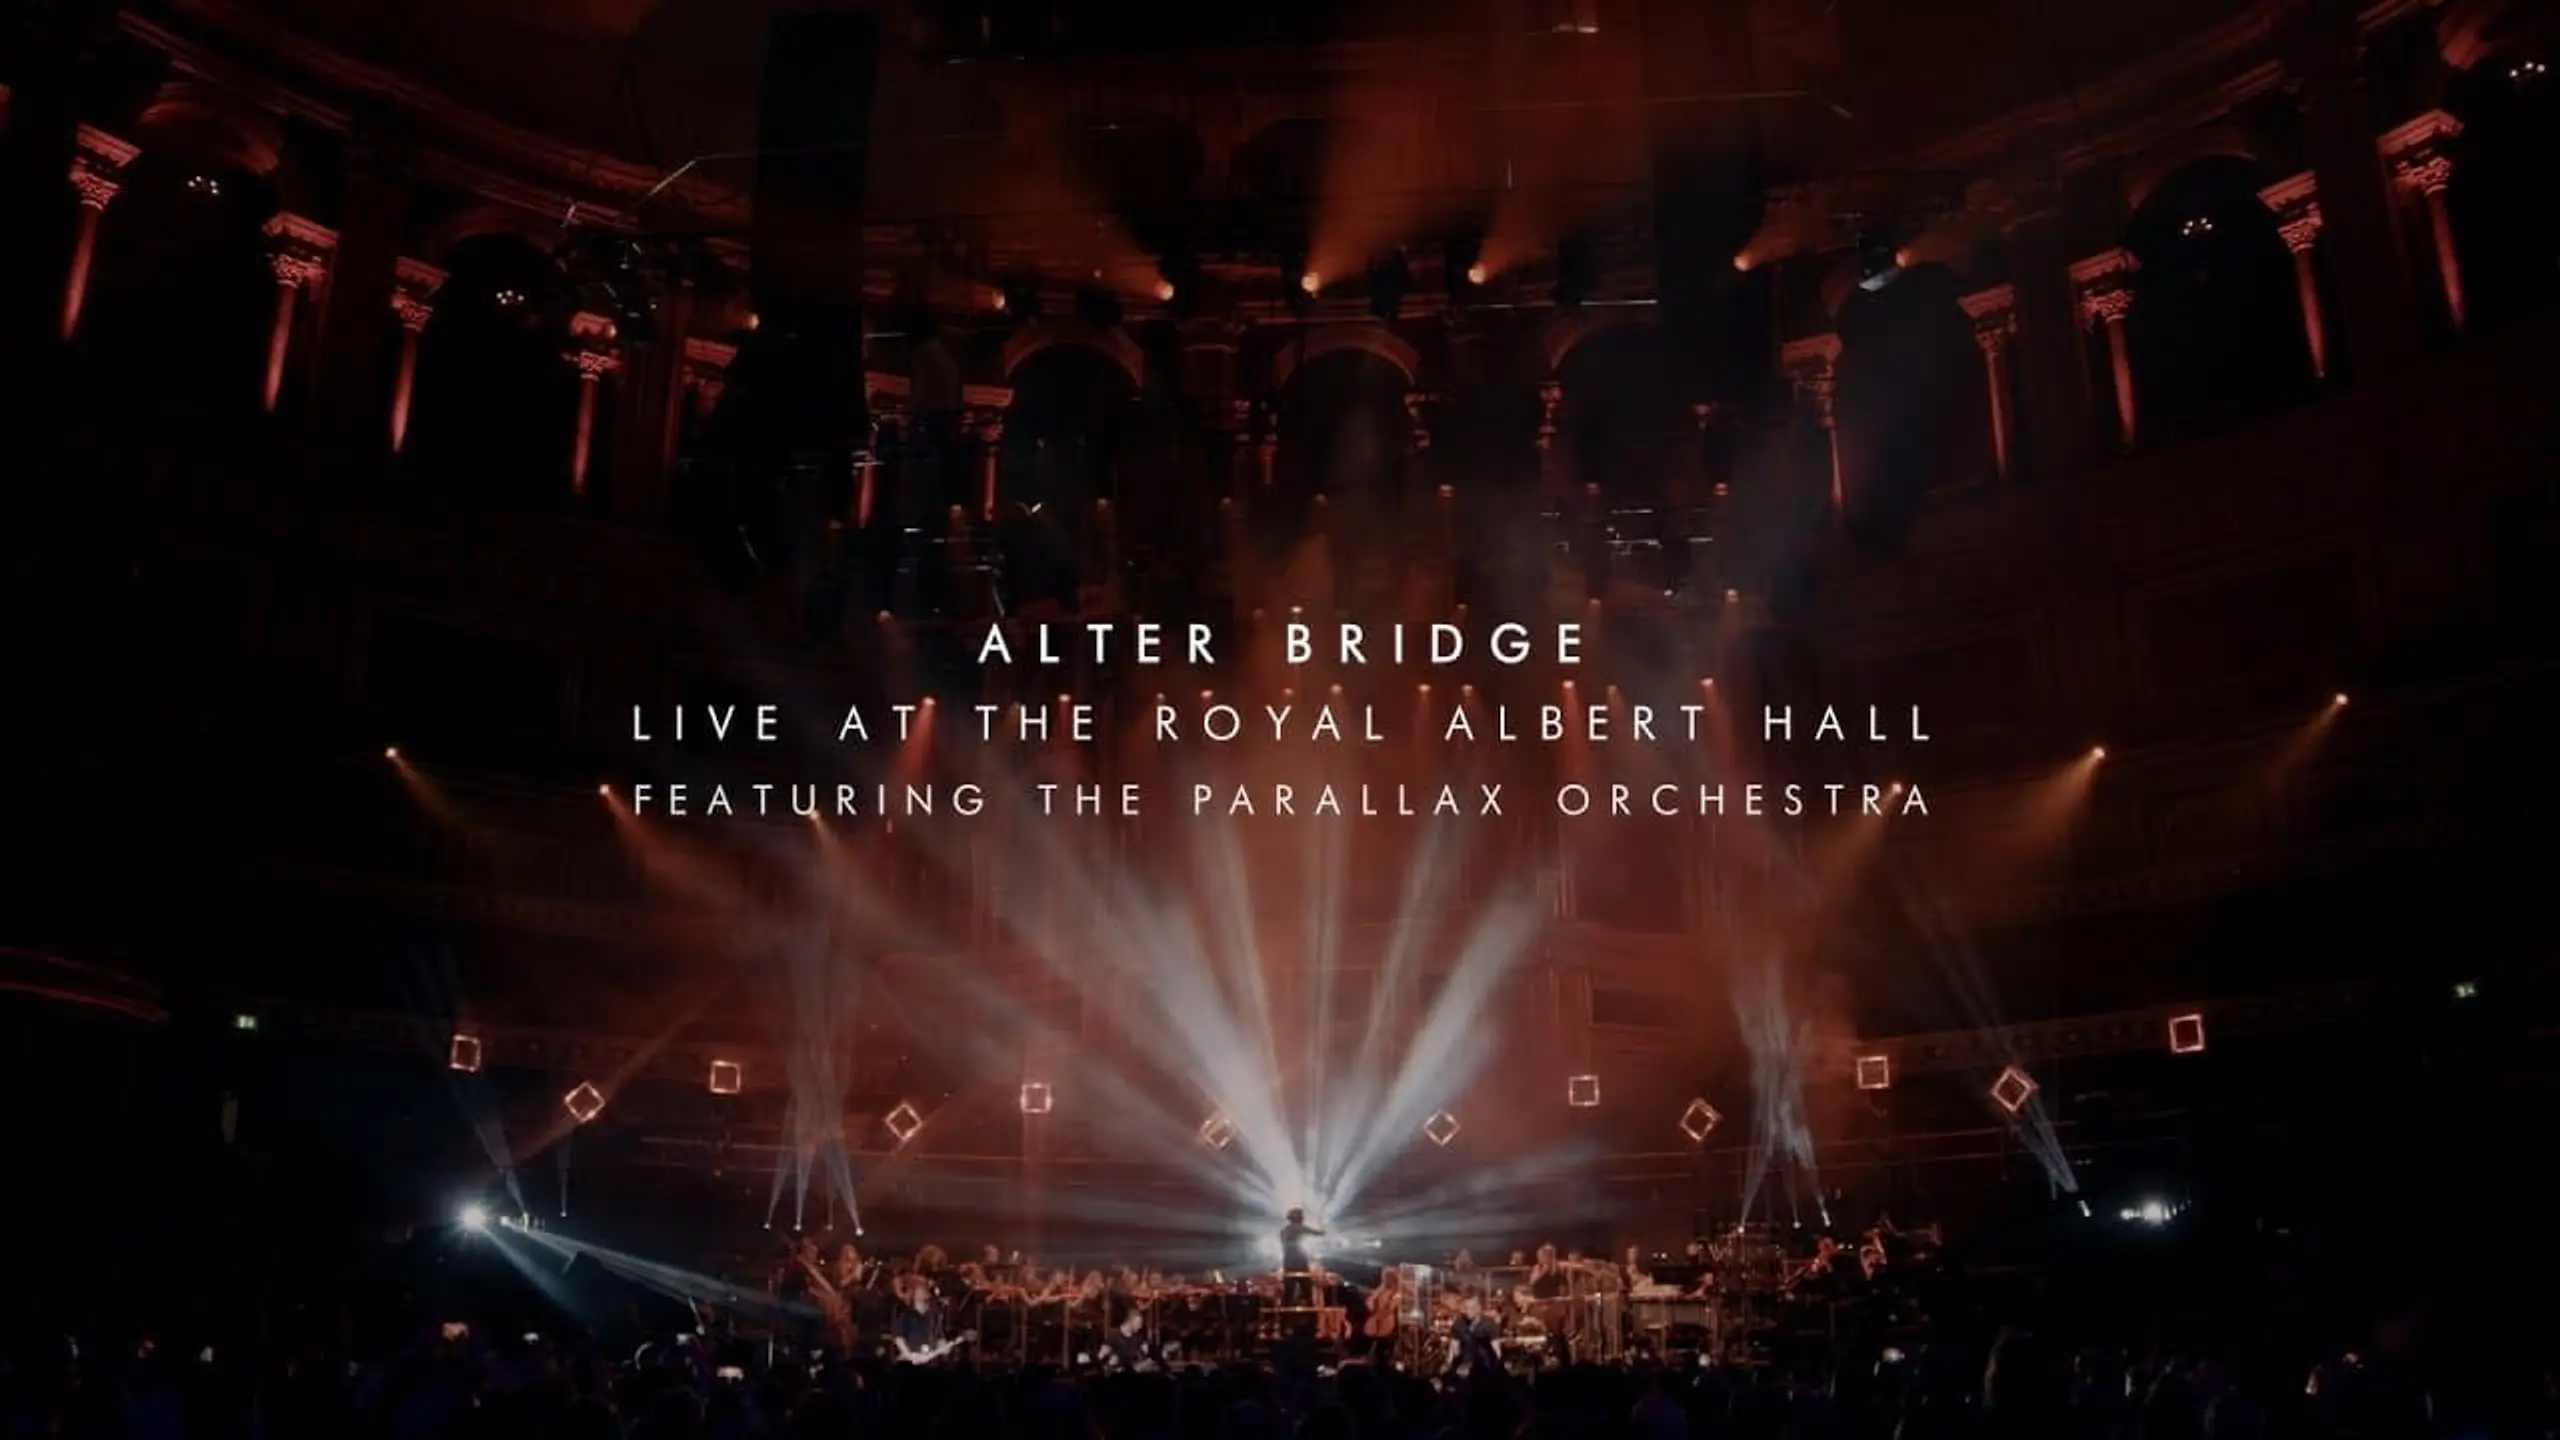 Alter Bridge: Live at the Royal Albert Hall (featuring The Parallax Orchestra)